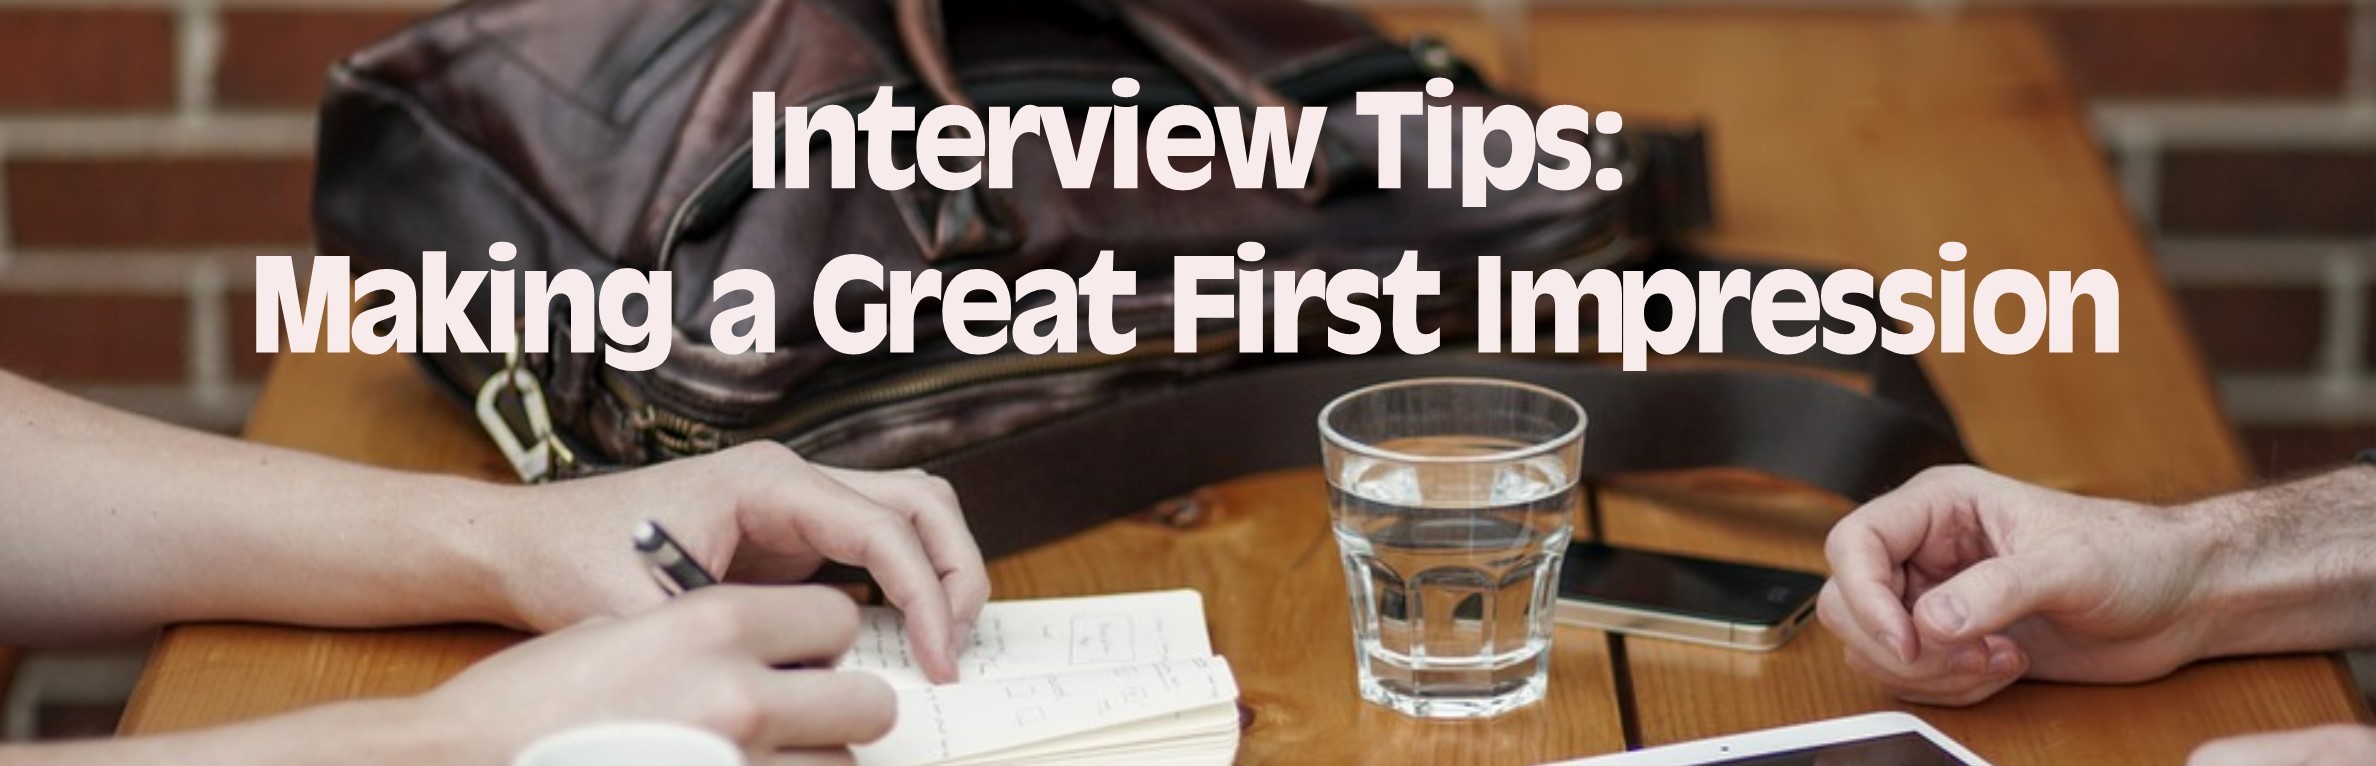 making a good impression at an interview